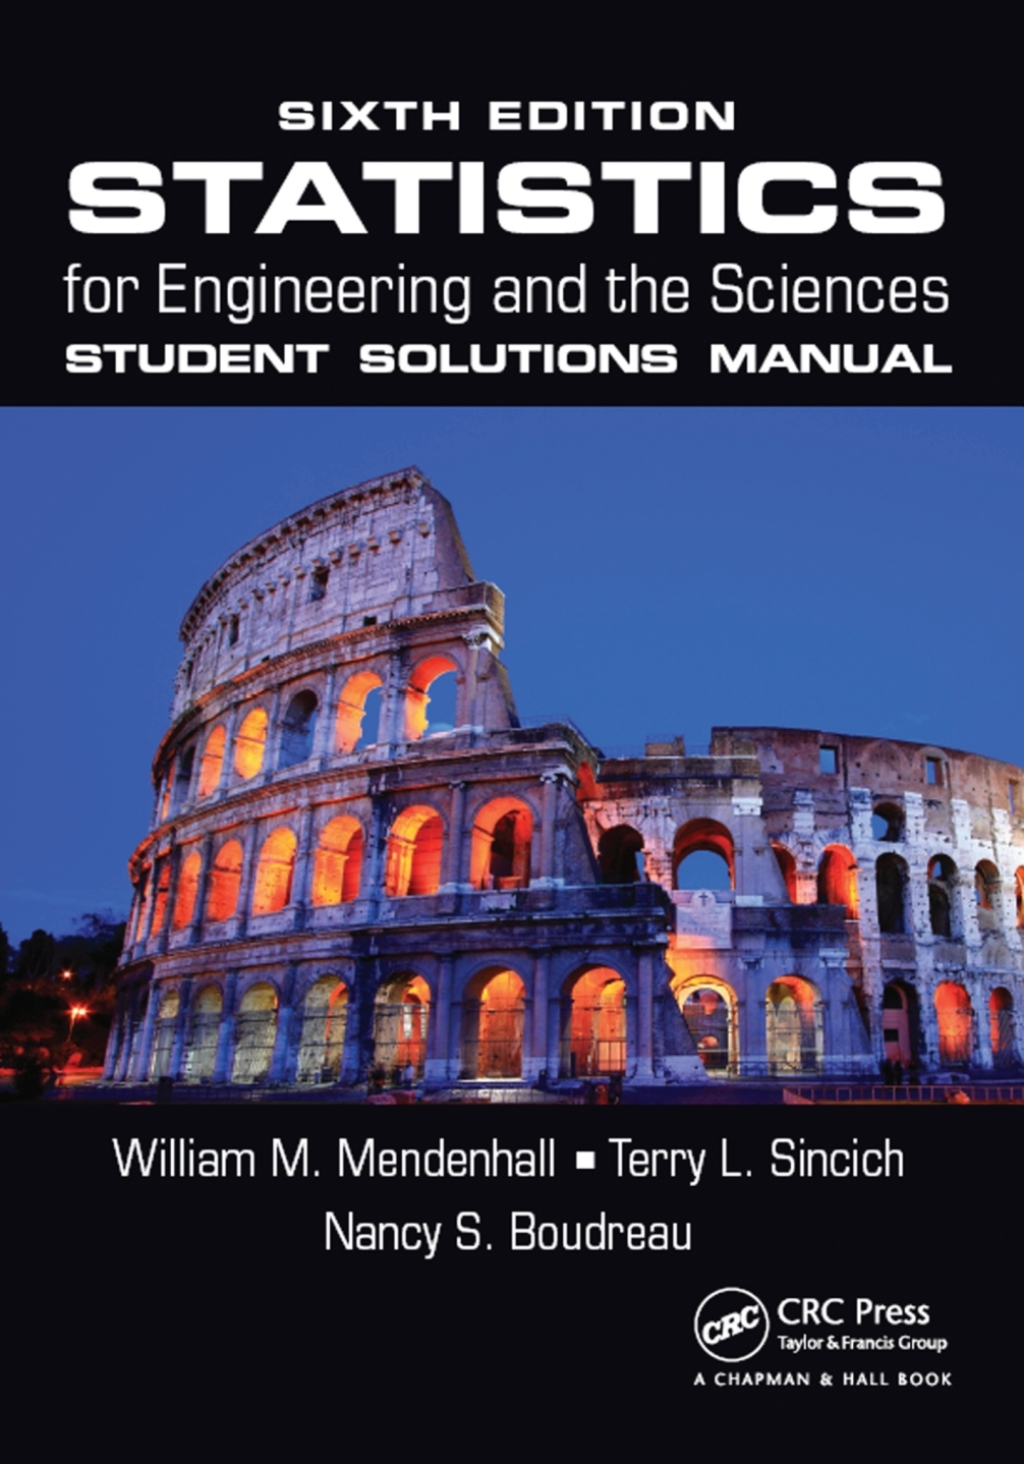 Statistics for Engineering and the Sciences Student Solutions Manual - 6th Edition (eBook)